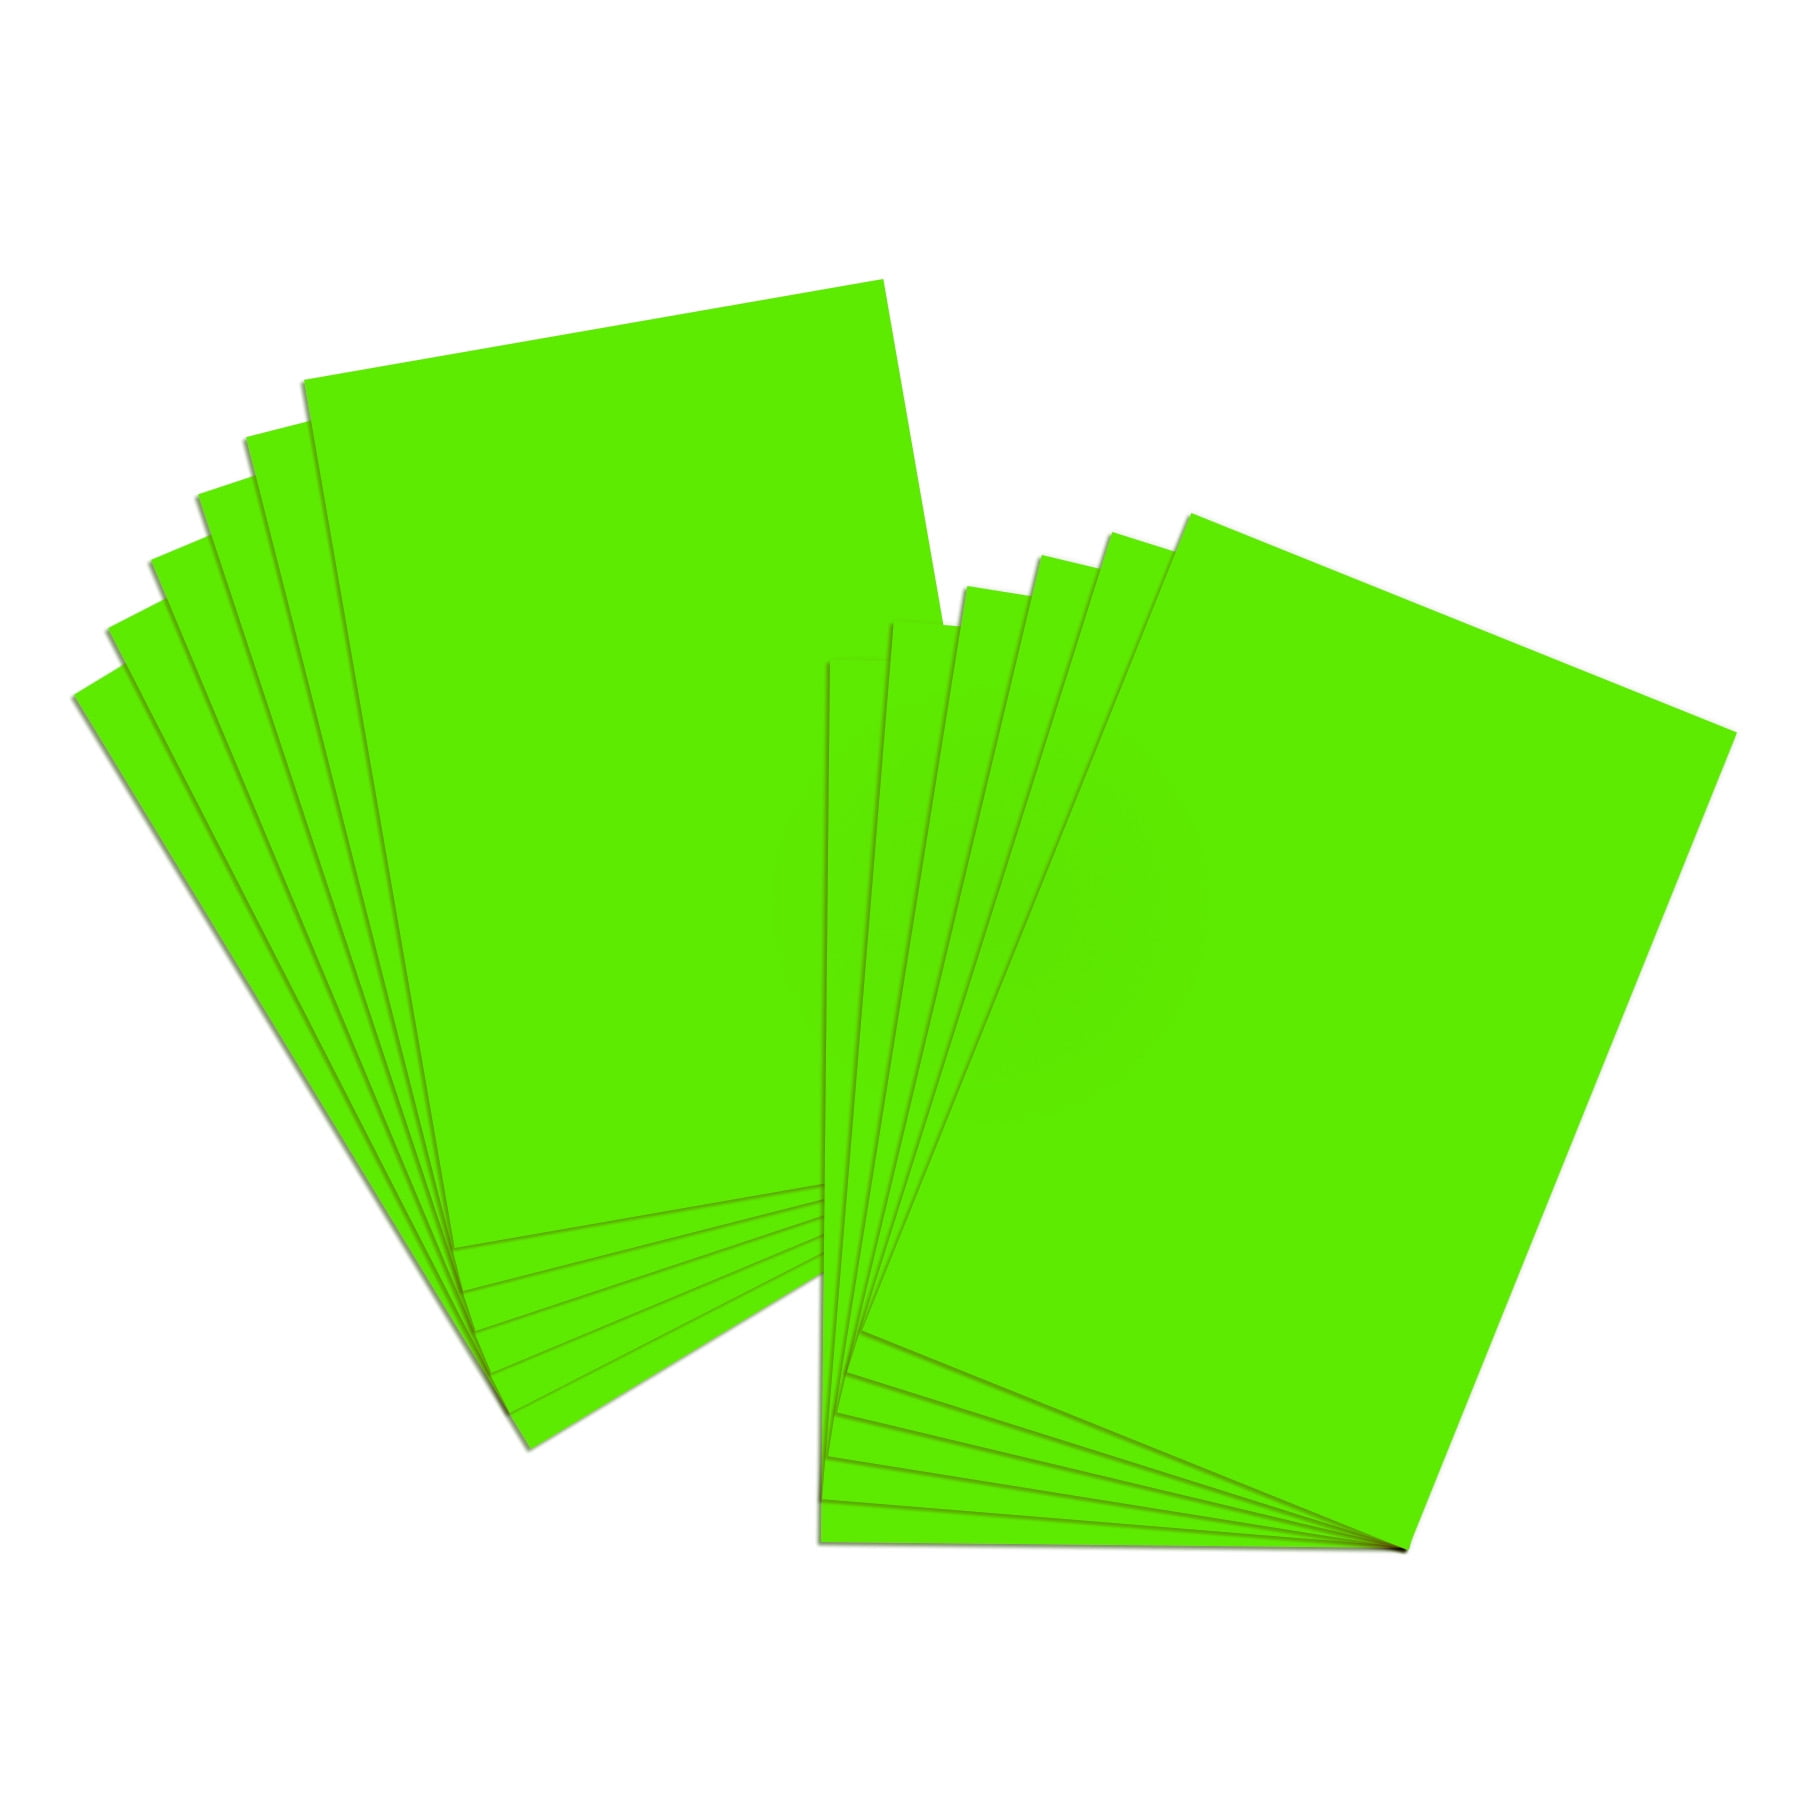 Colored Paper Drawing Painting Scrapbooking Graphic Display Carton Art Craft Projects School Home DIY Decor 25-Pack BAZIC 22 X 28 Neon Yellow Poster Board 